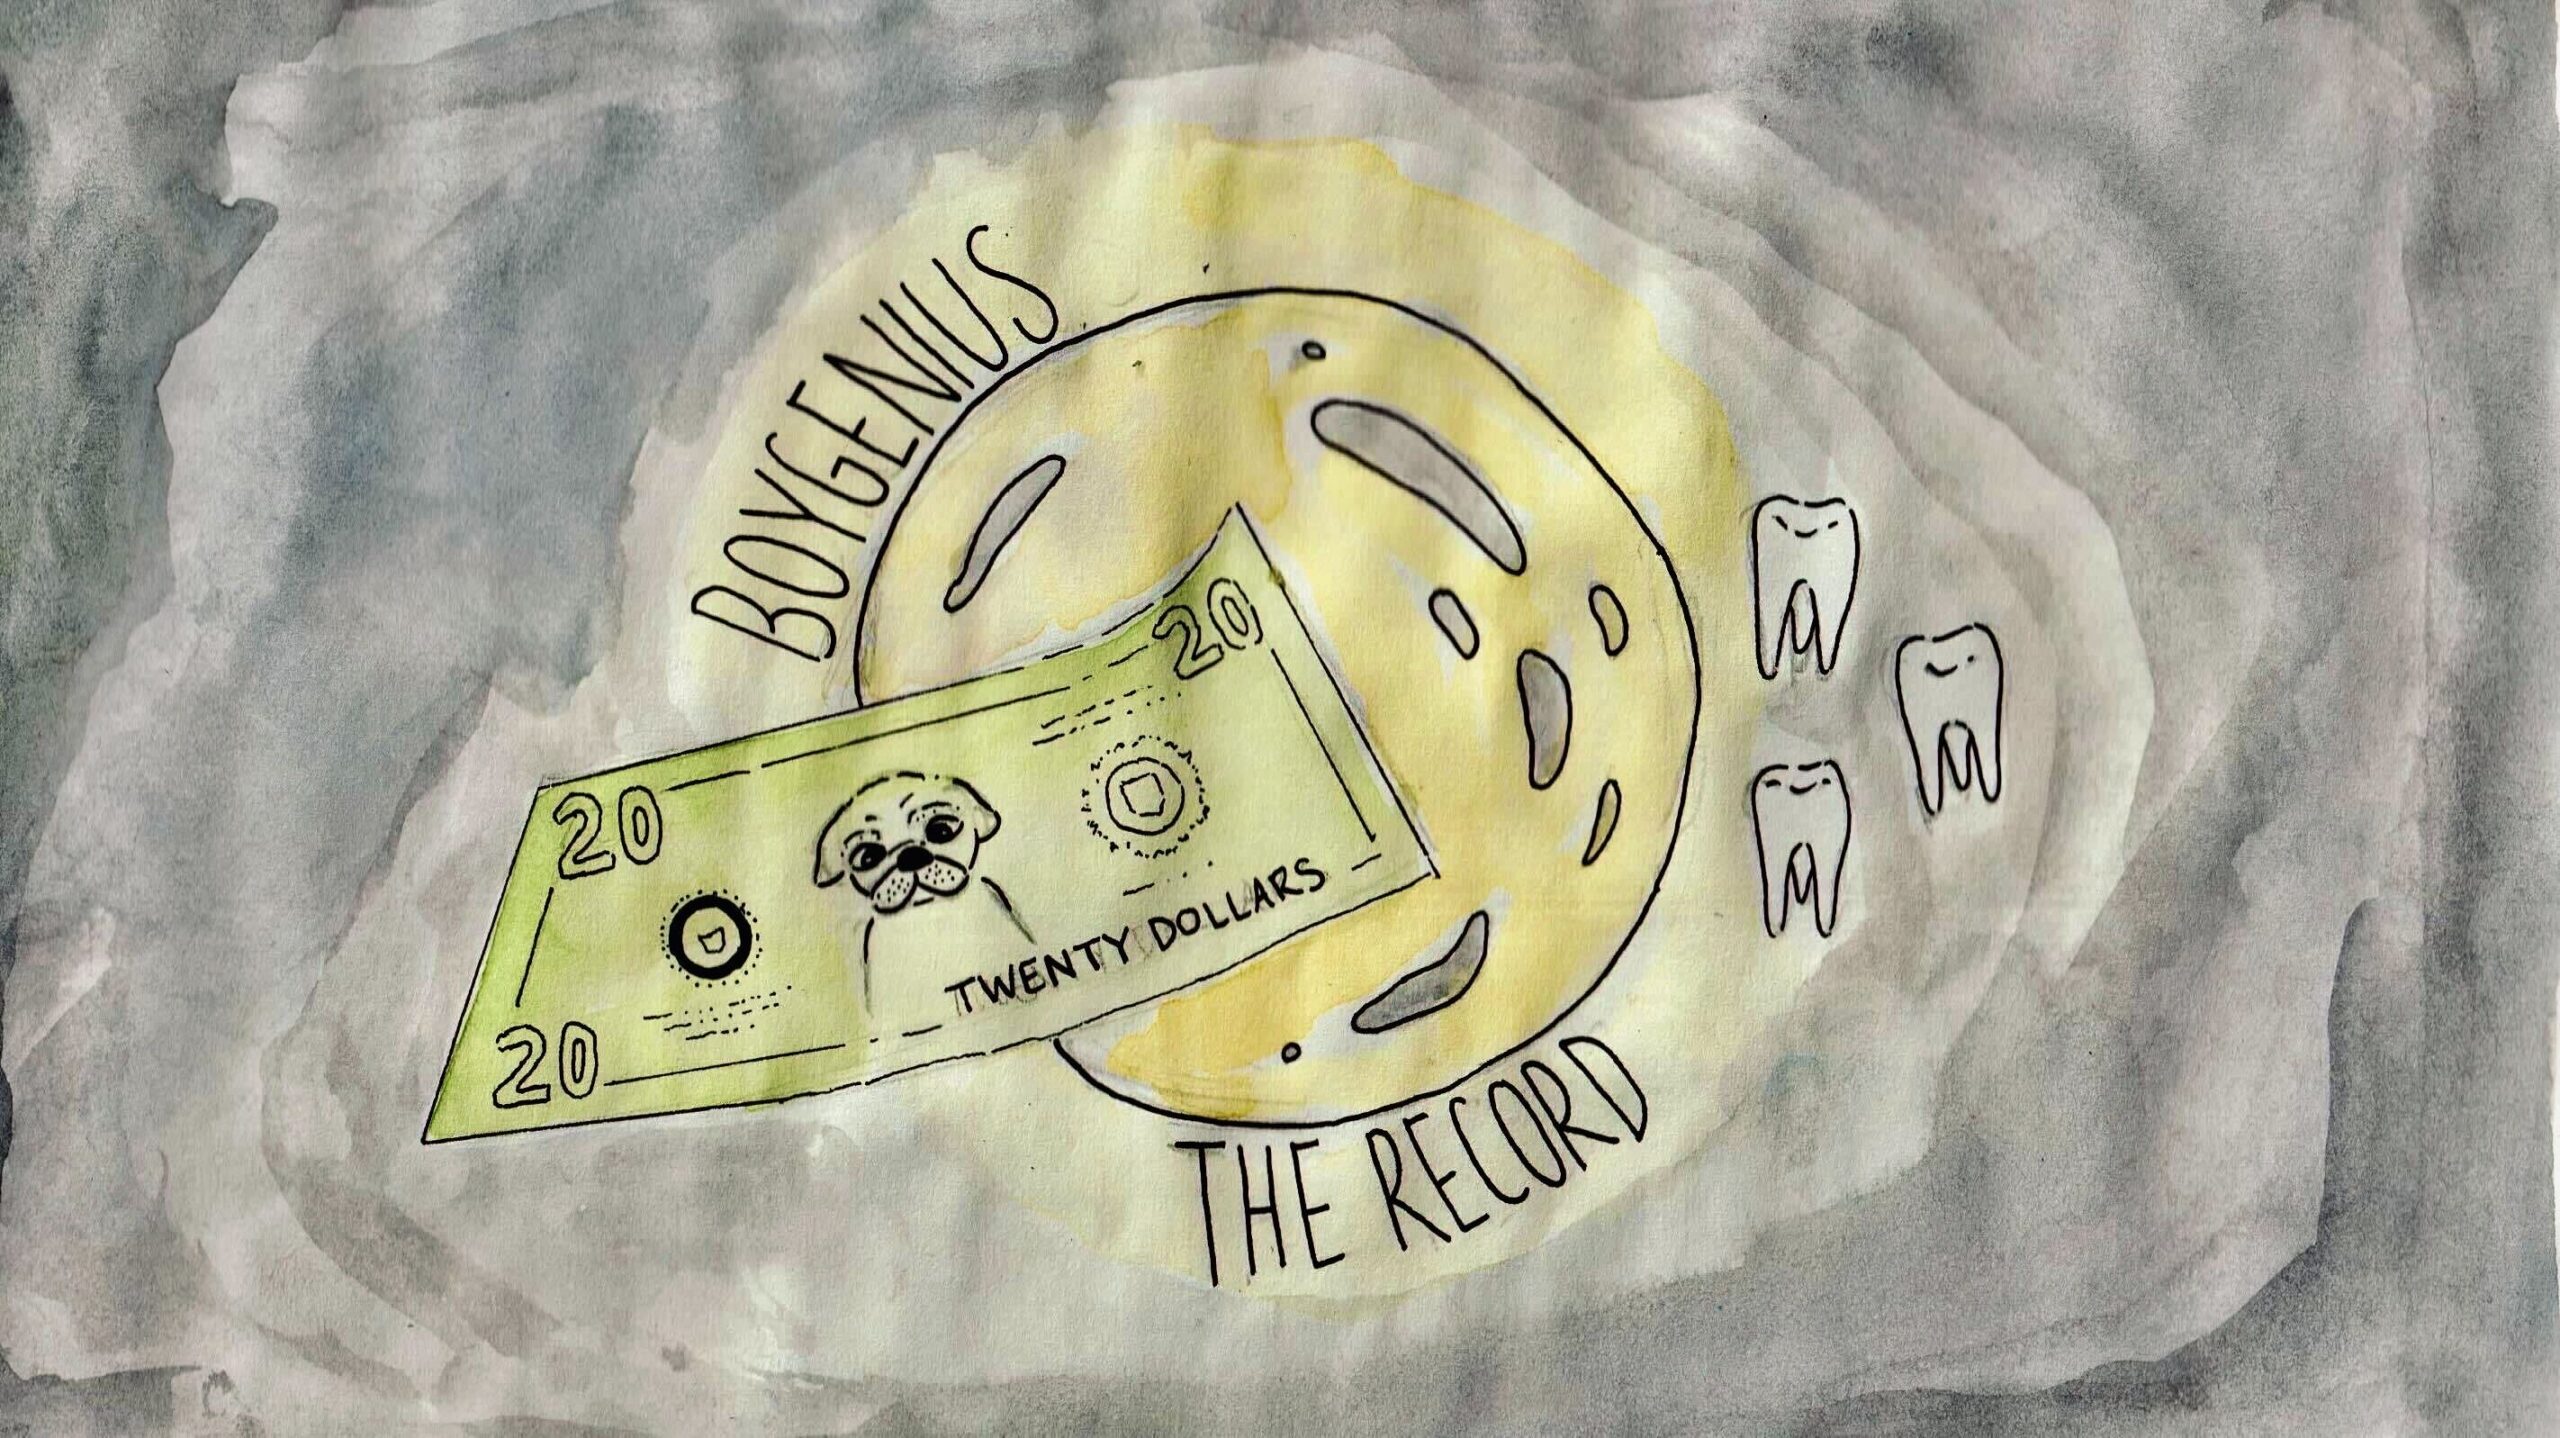 Illustration of a yellow moon surrounded by three teeth, a twenty dollar bill with a pug, and the words “boygenius” and “the record.”